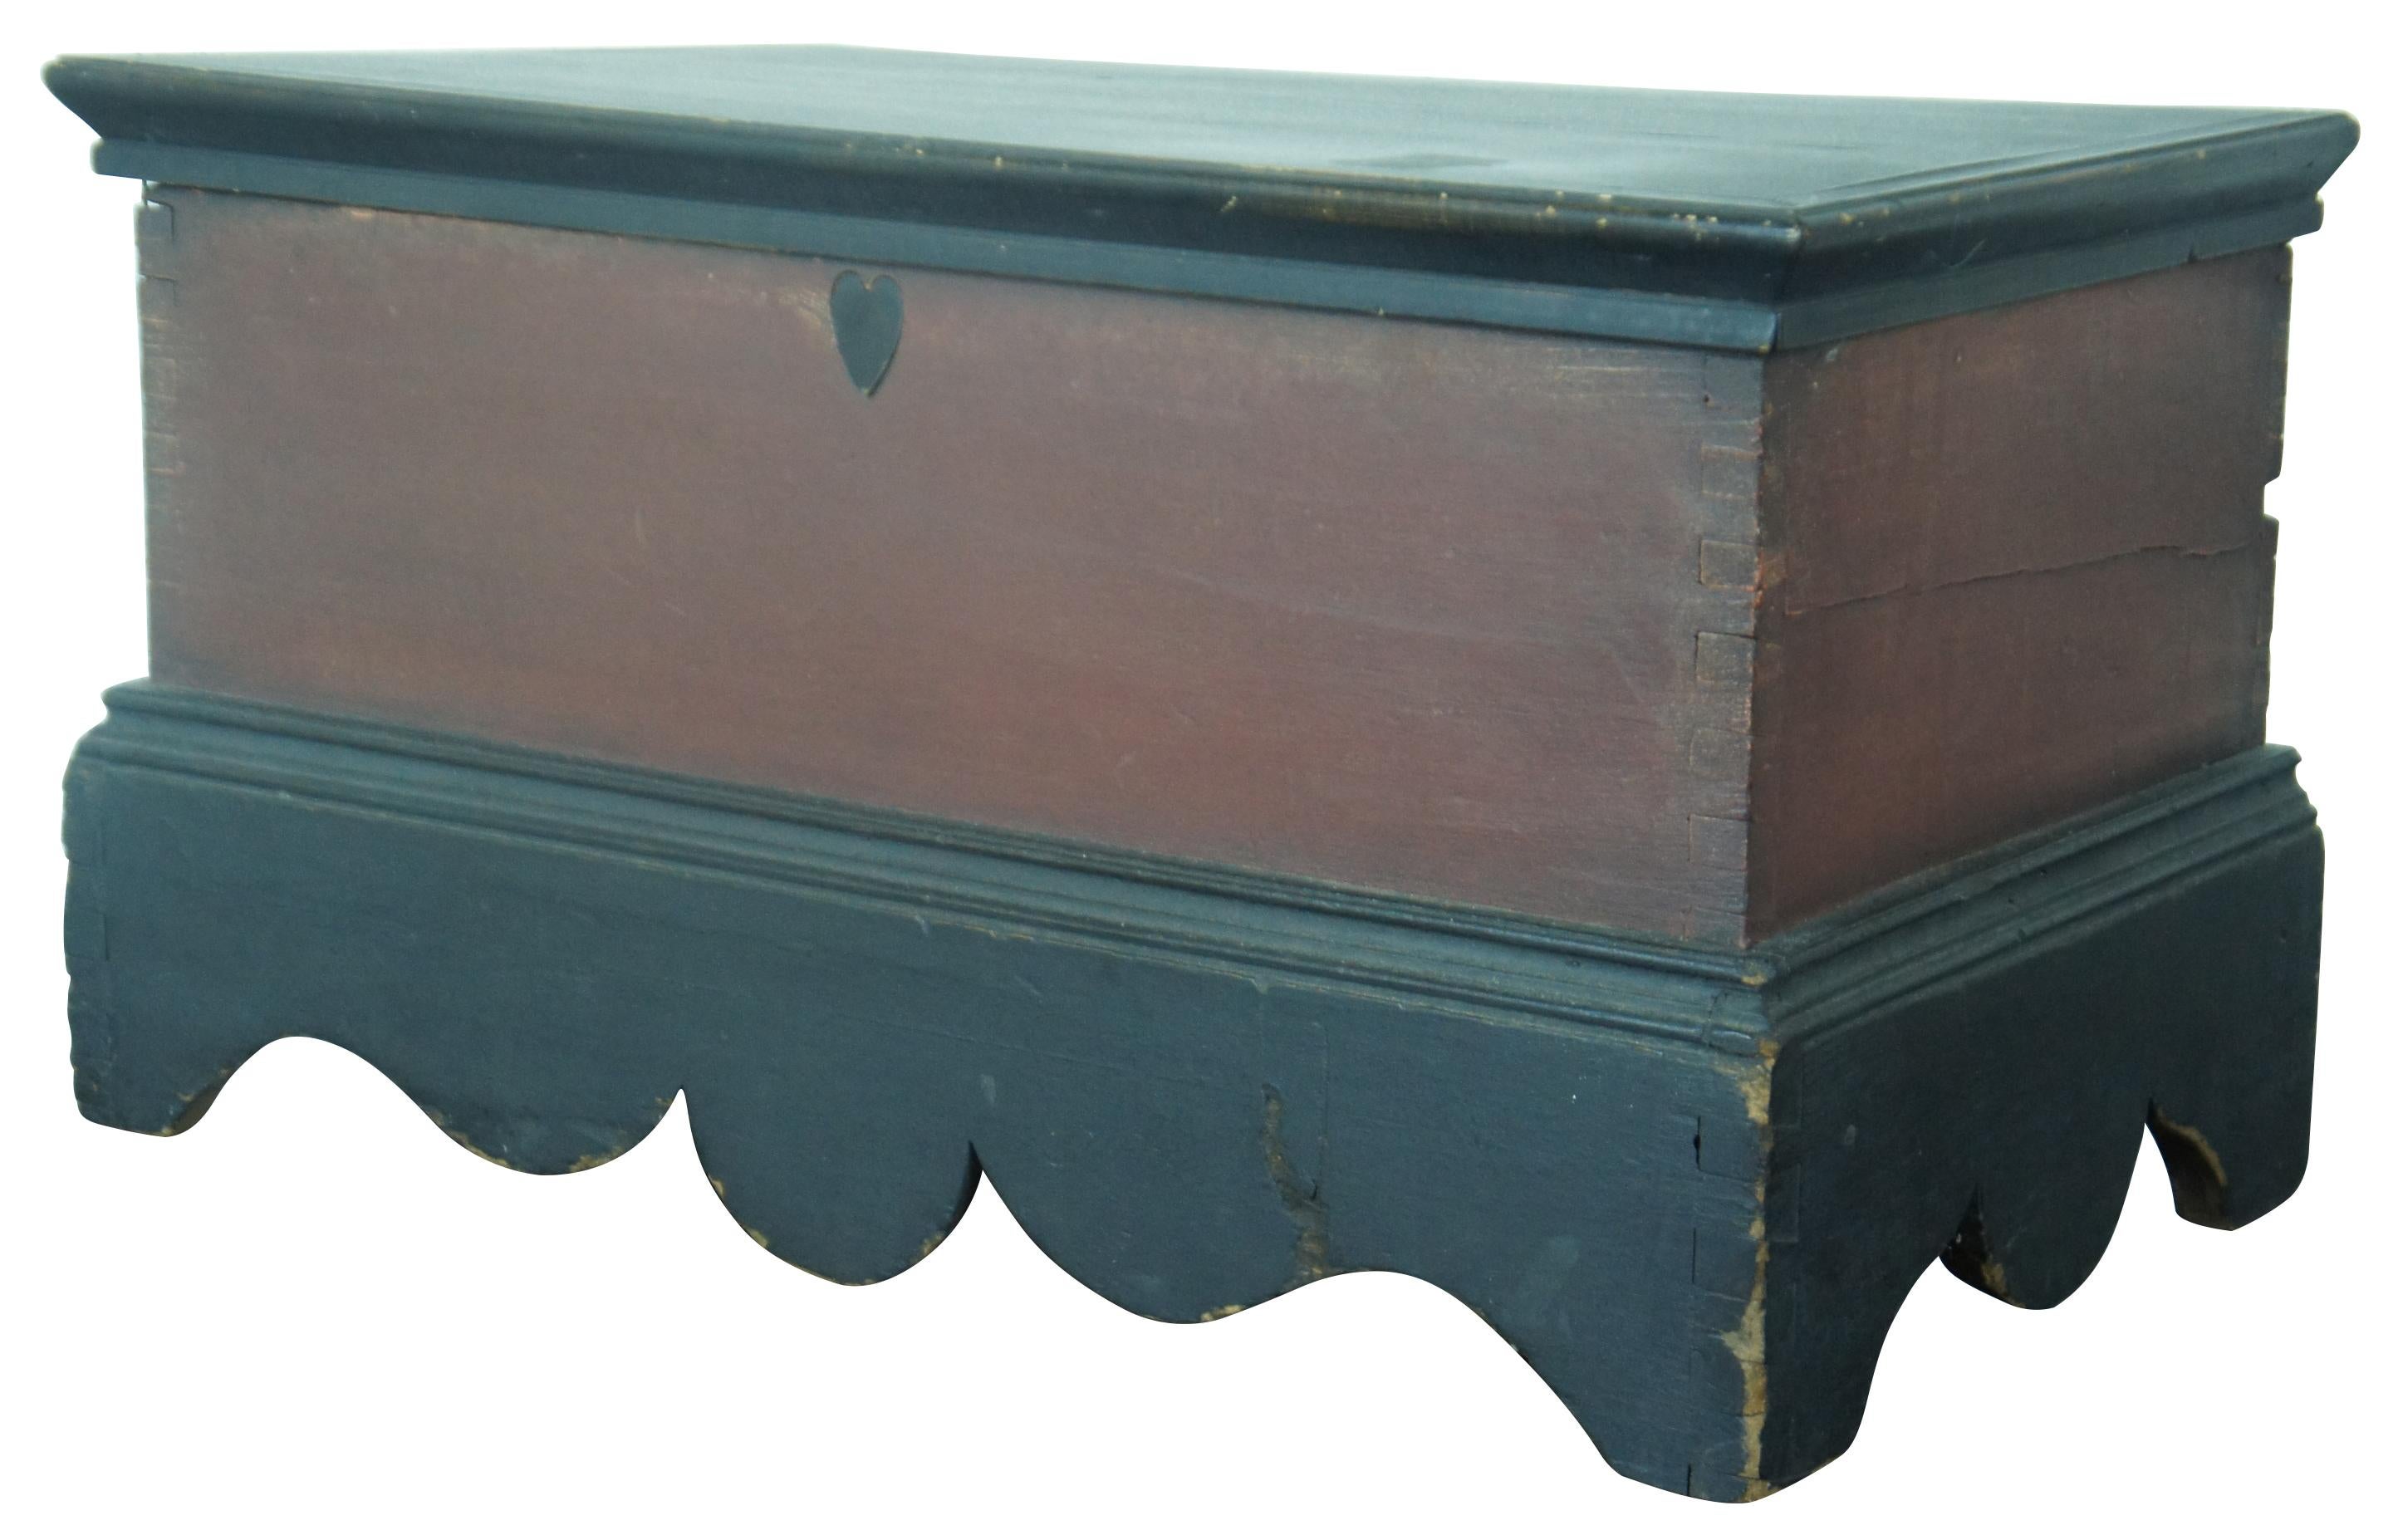 Antique 19th century dovetailed Salesman sample hope chest or toy storage trunk. Painted in red and black, with scalloped edging at the base and a heart where a lock would be.